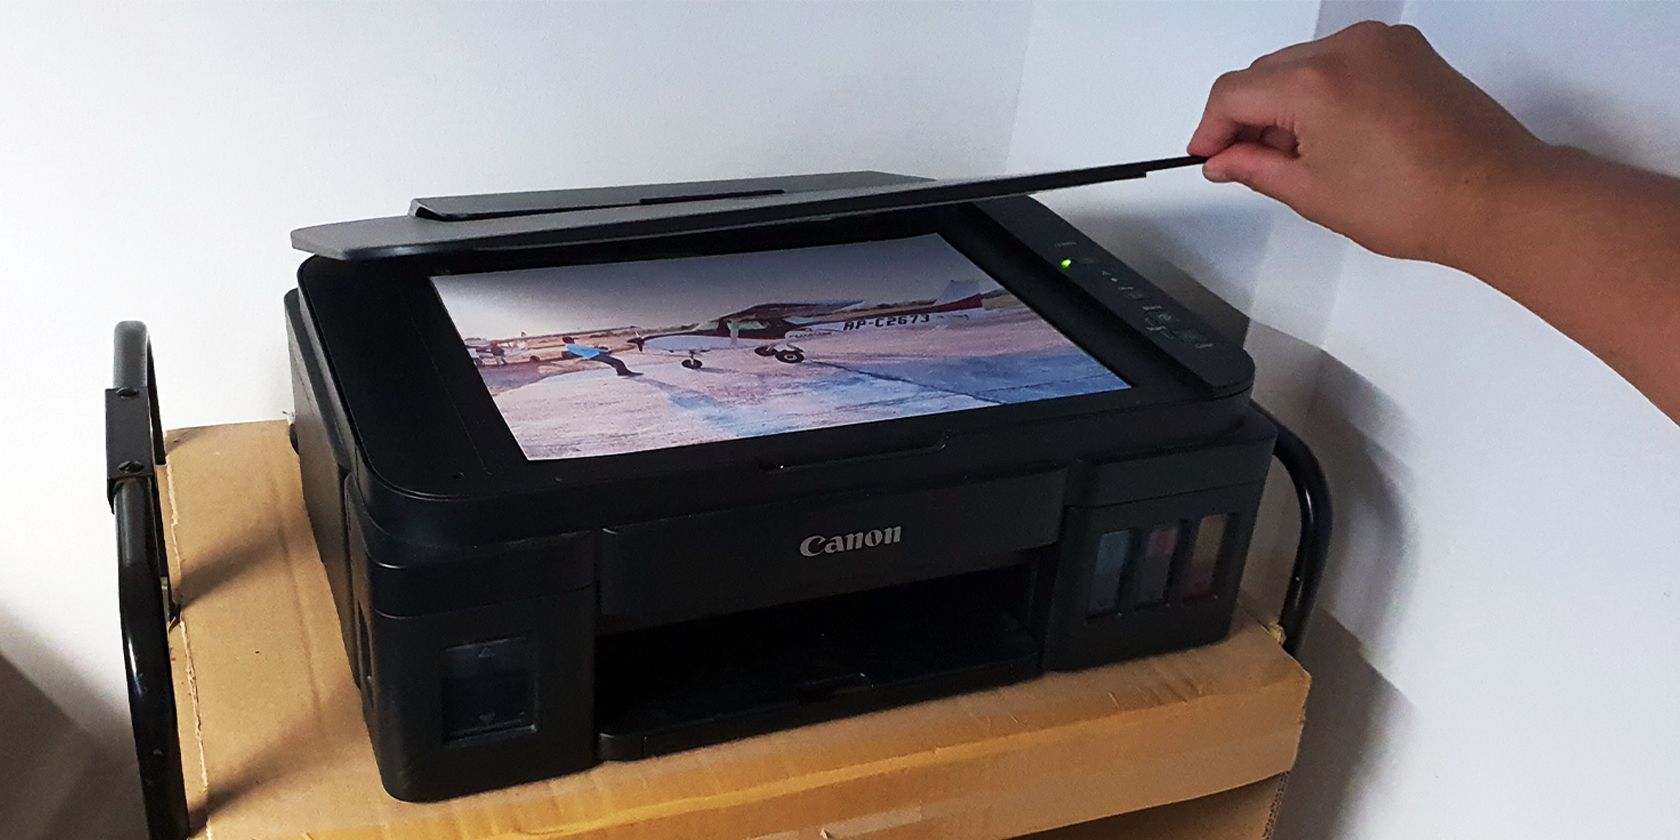 How to Scan to a Computer from Any Printer